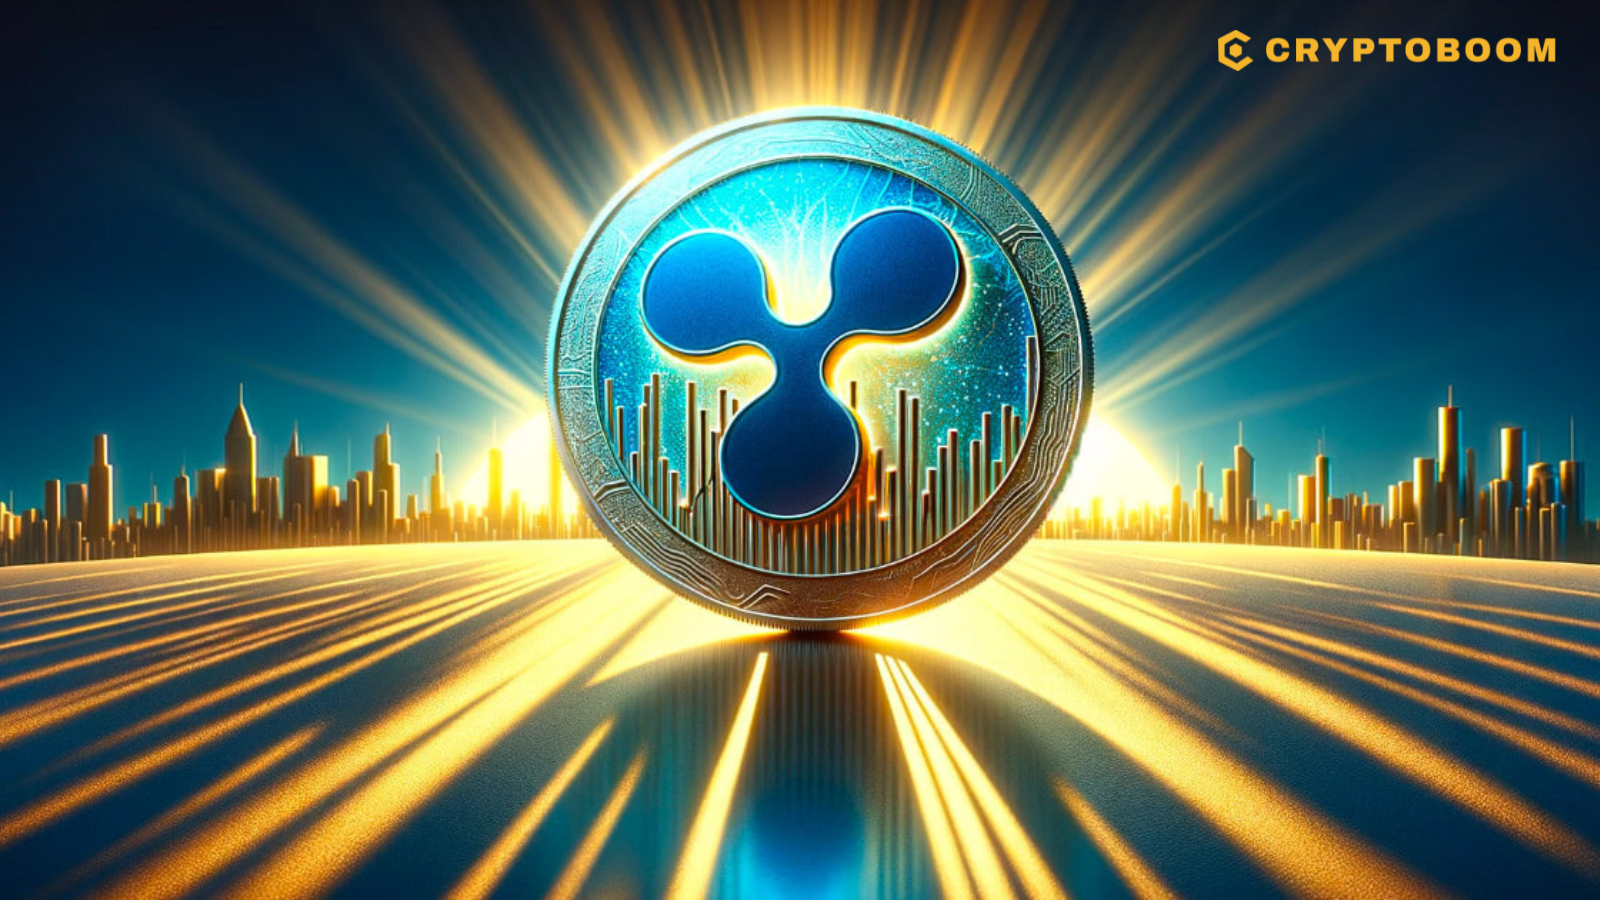 XRP Price Analysis - A Legal Tailwind and Bullish Chart Signals